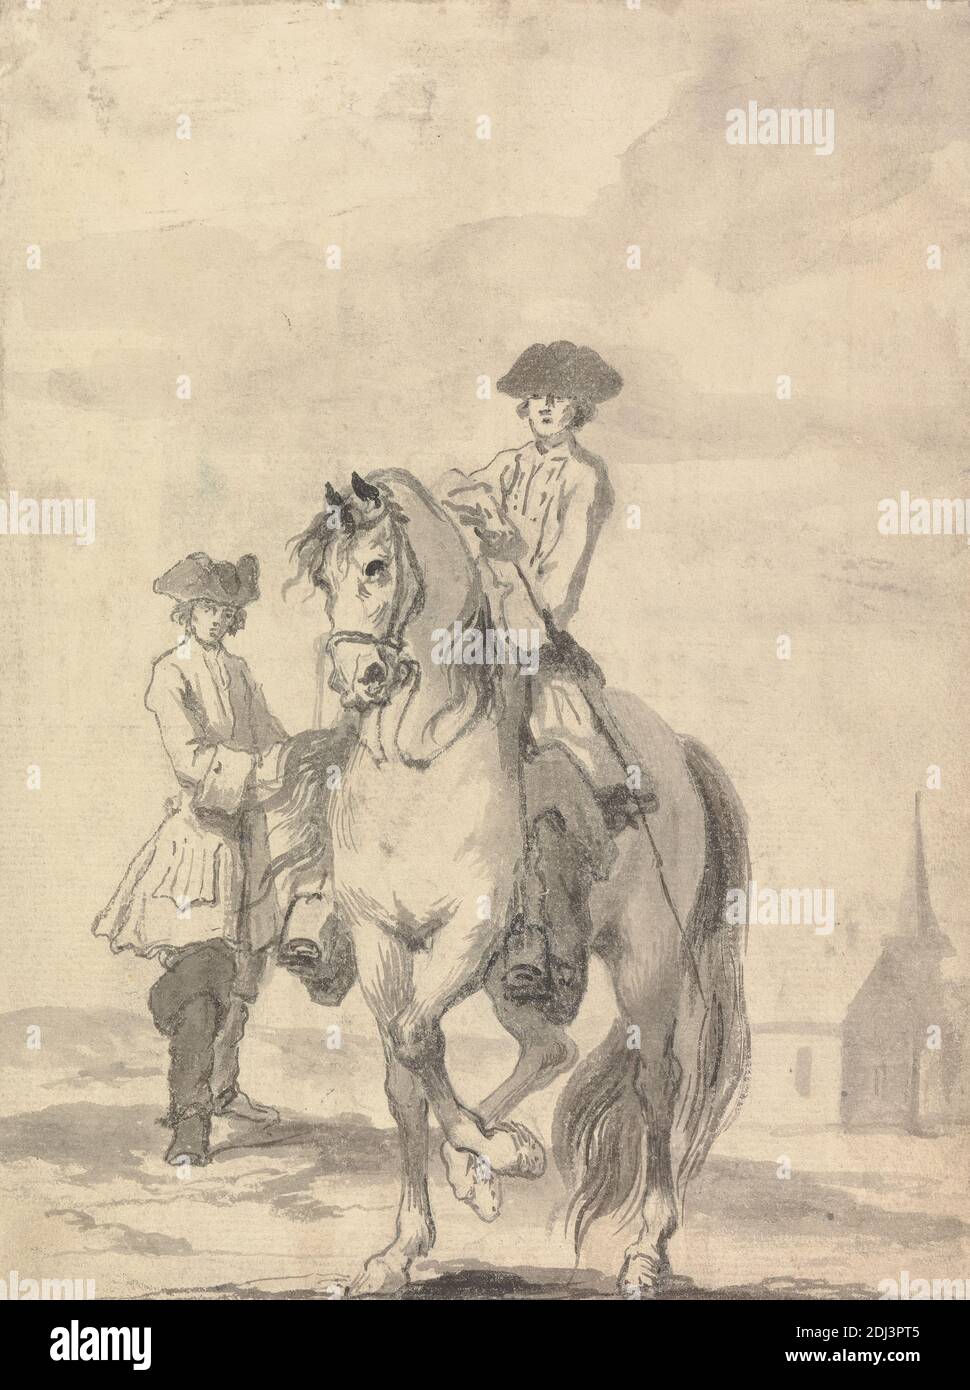 The Passage to the Right Aided by the Rider's Rod & the Master Holding the Alonge: Engraved as plate 10 in Twenty Five Actions of the Manage Horse..., John Vanderbank, 1694–1739, British, 1729, Pen, in gray ink, black ink, gray wash and graphite on medium, moderately textured, blued white, laid paper, Sheet: 8 1/4 × 6 3/16 inches (21 × 15.7 cm), church, figure study, figures (representations), genre subject, horse (animal), horseback riders, horseback riding, horsemen, men, sporting art, tricorn hats Stock Photo